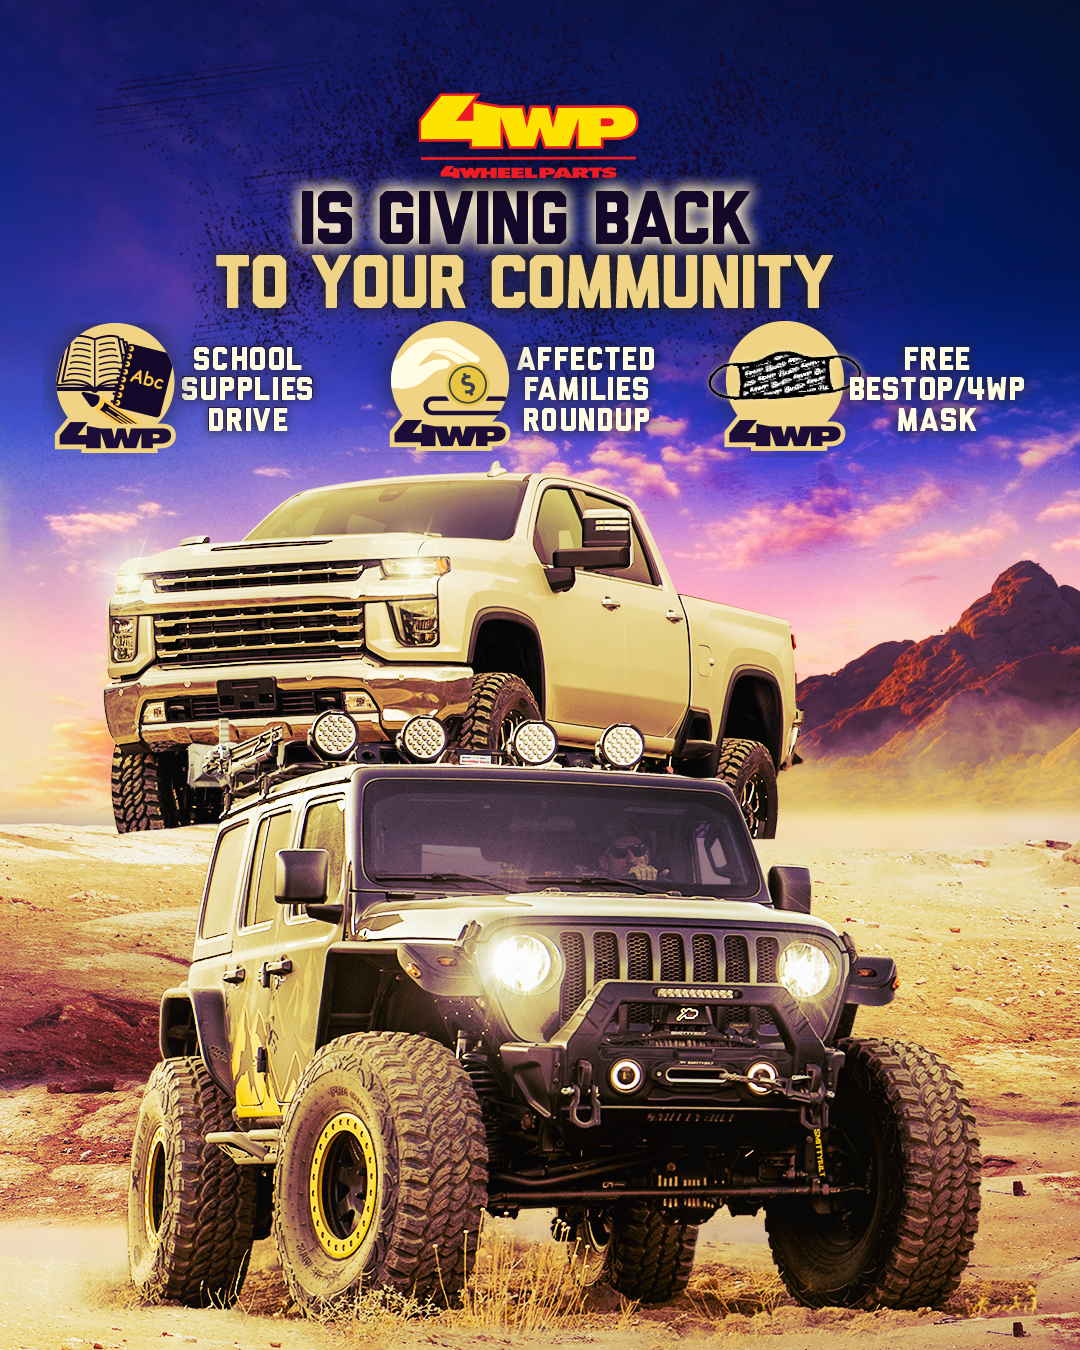 4 Wheel Parts Hosting Donation Drive for School Supplies | THE SHOP